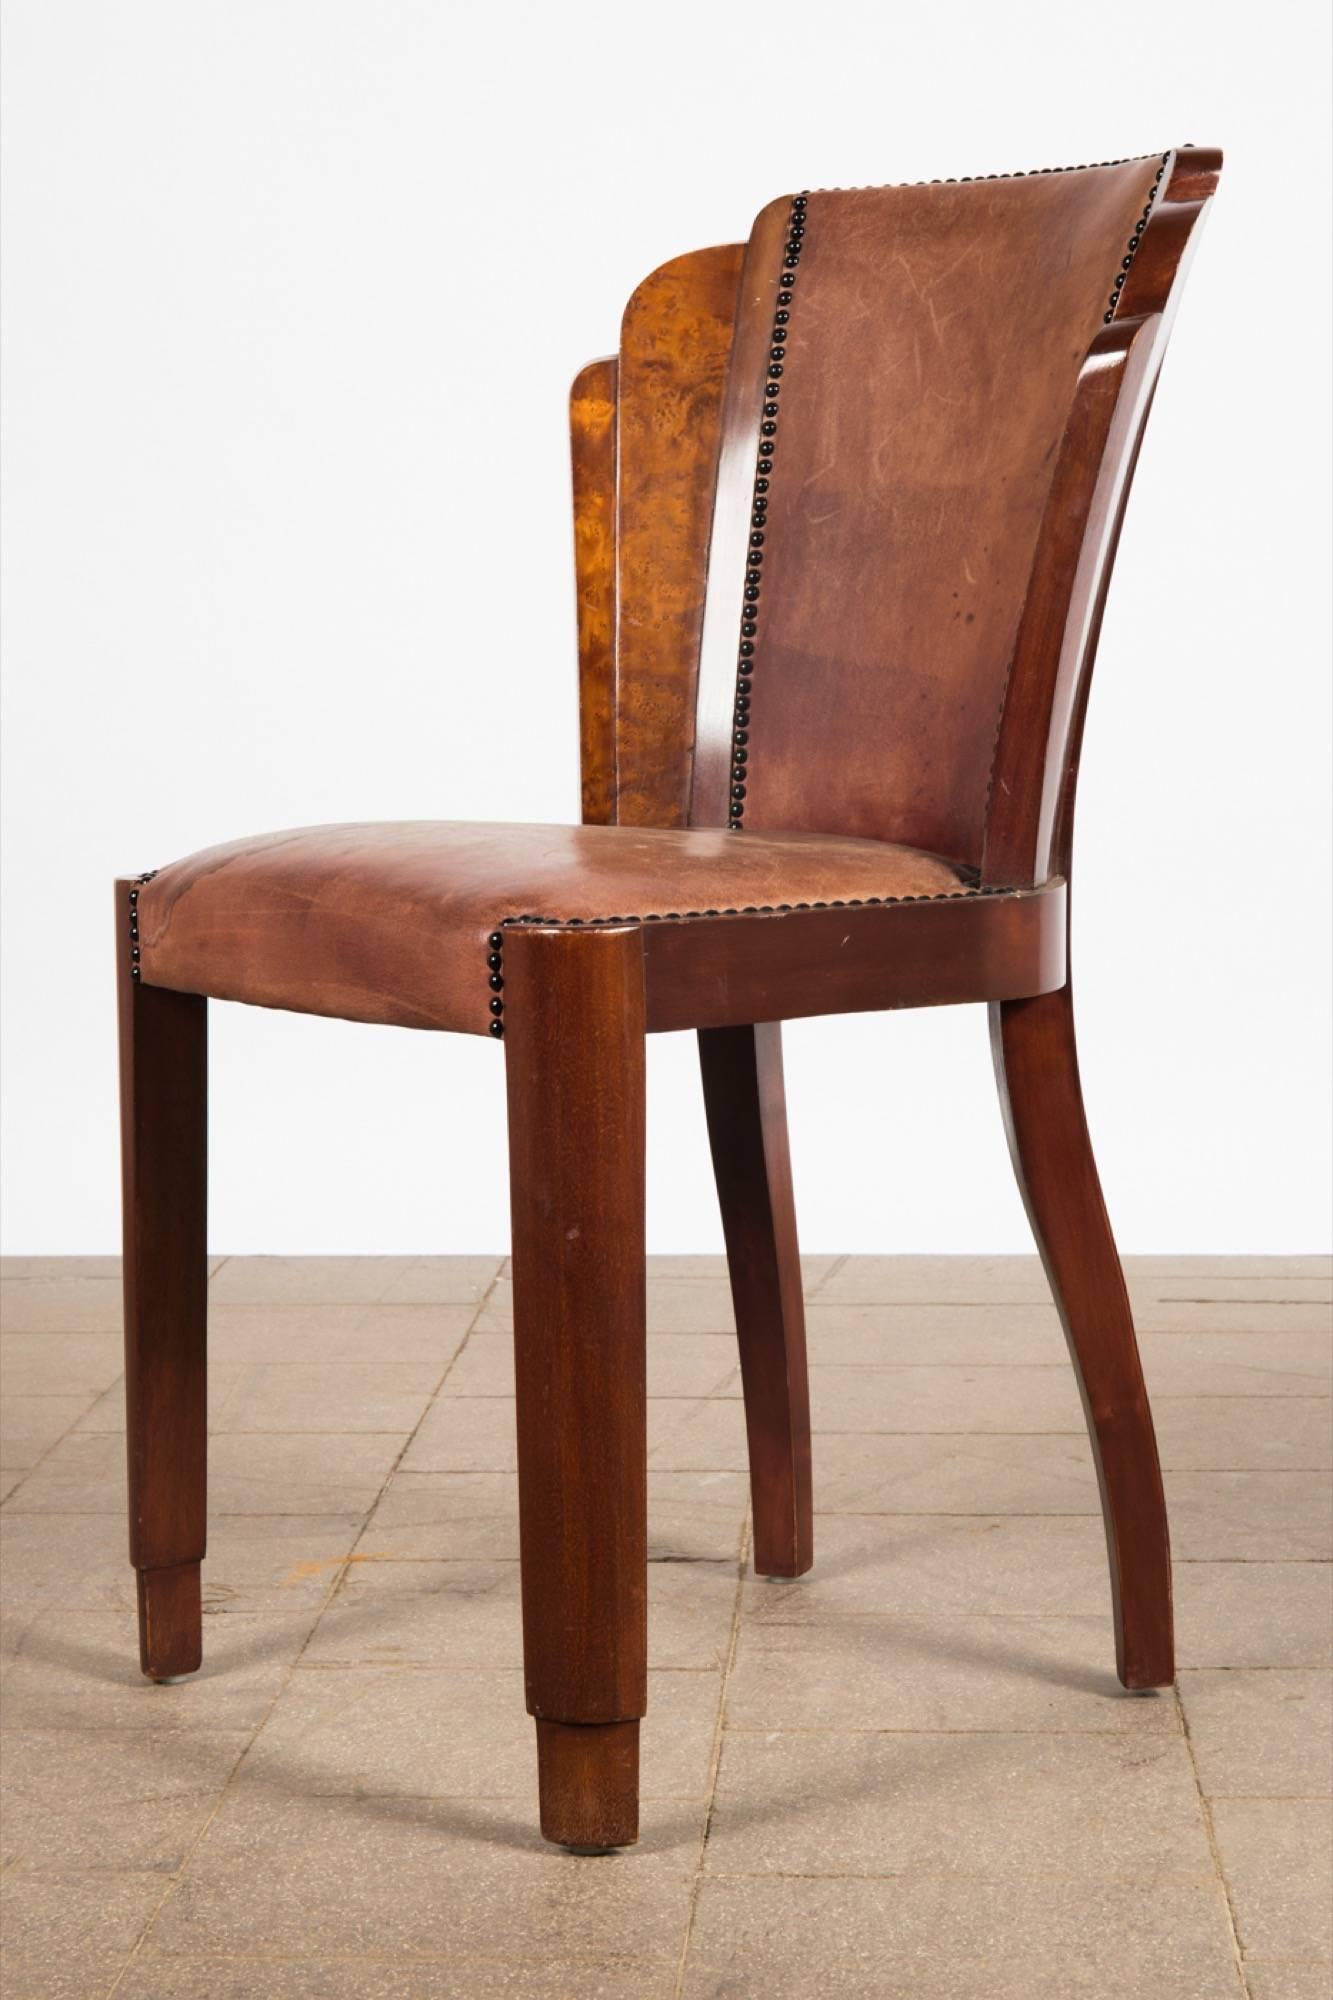 European Set of Six Art Deco Dining Chairs in Walnut Burl and Cognac Leather